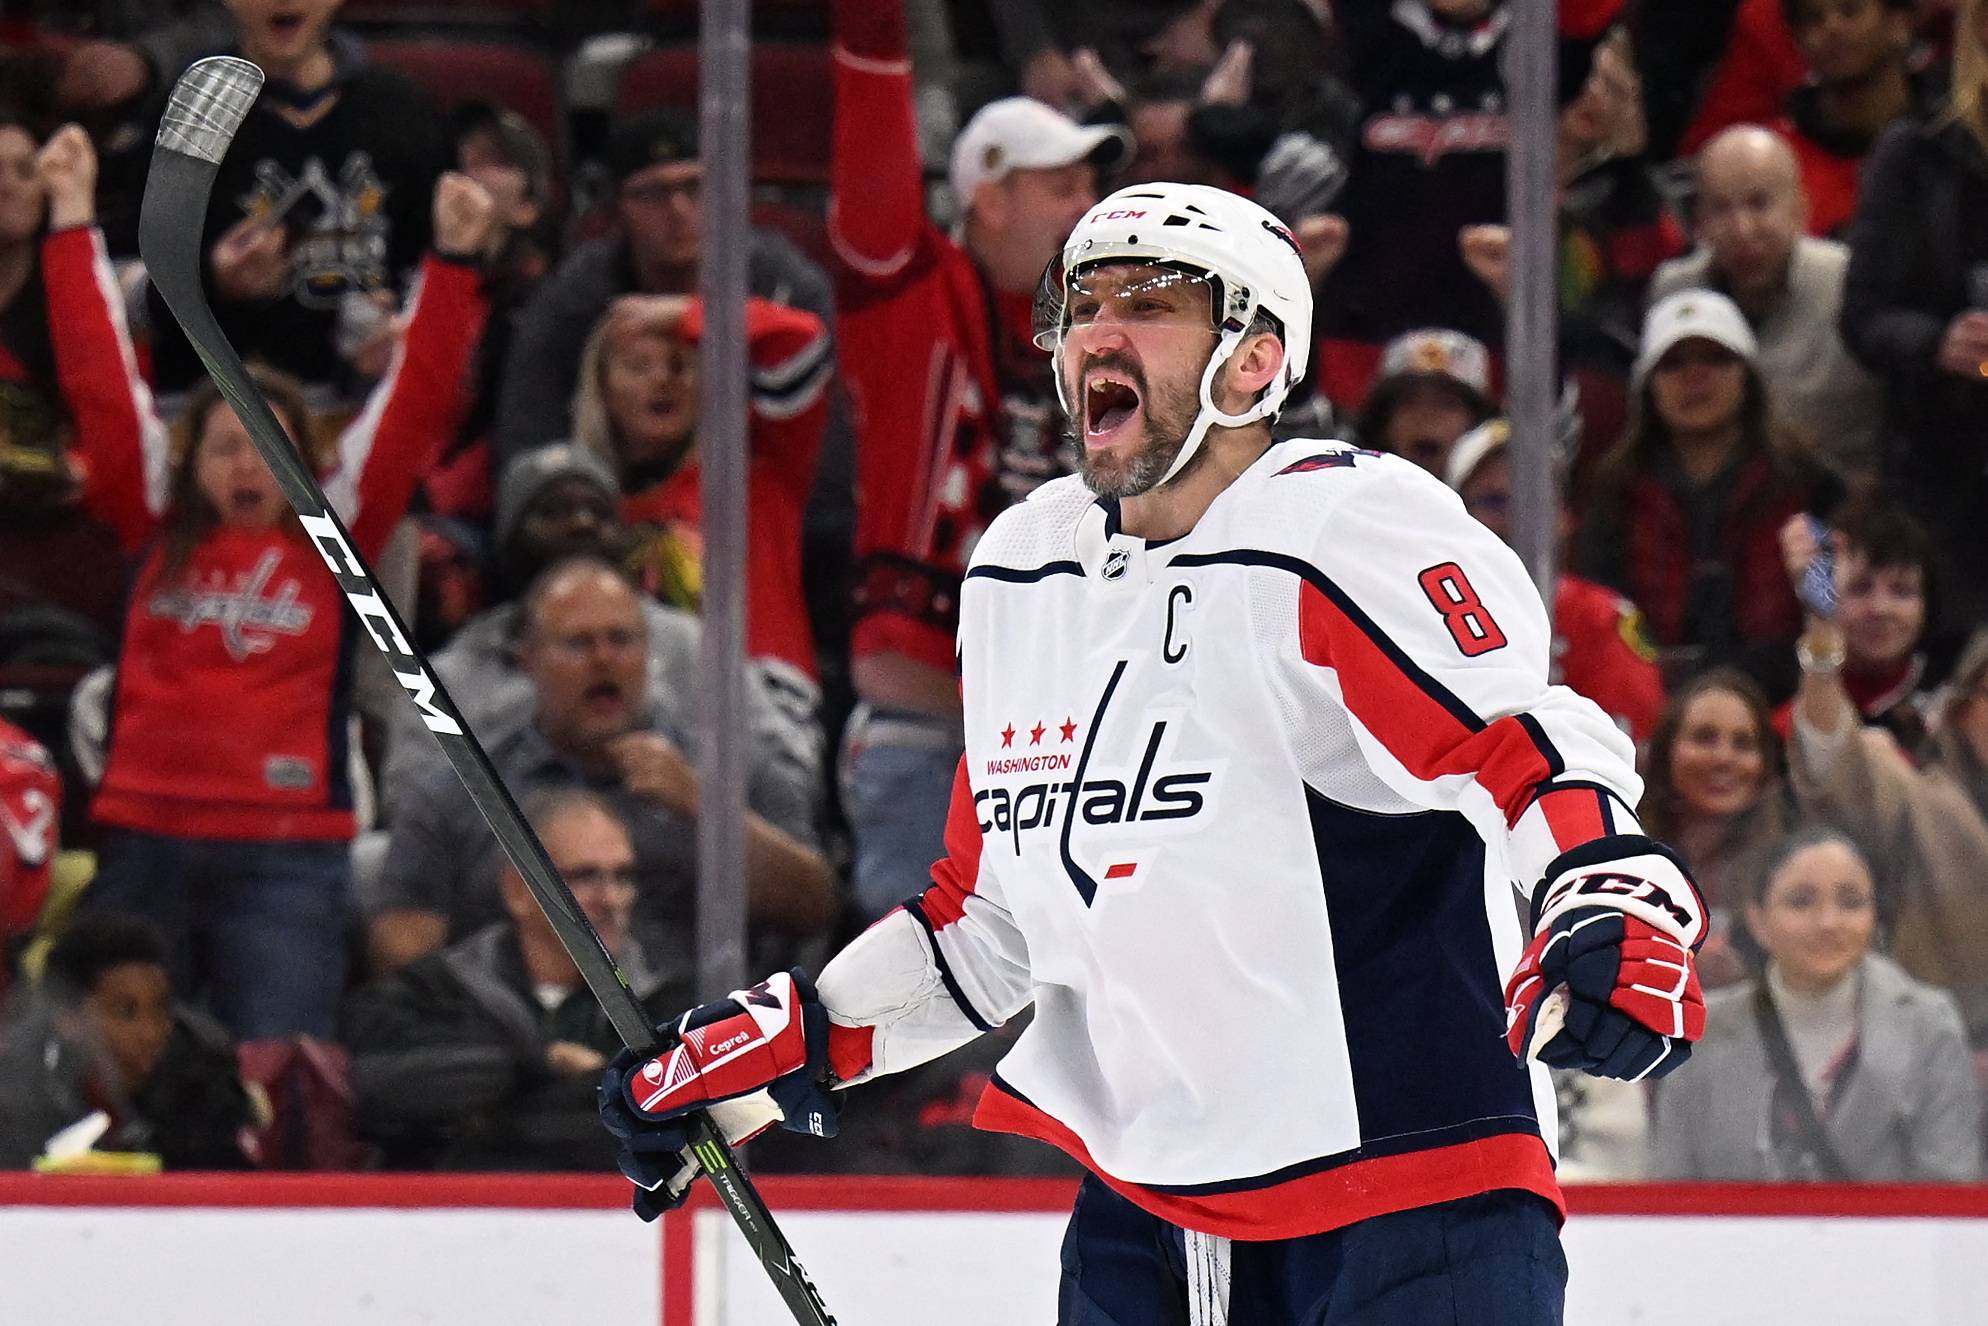 NBC Sports Hockey on X: @Capitals @ovi8 OCT. 5th, 2005: Alex Ovechkin  makes his NHL debut scoring the first two goals of his career. Now, in his  15th season, he sits two